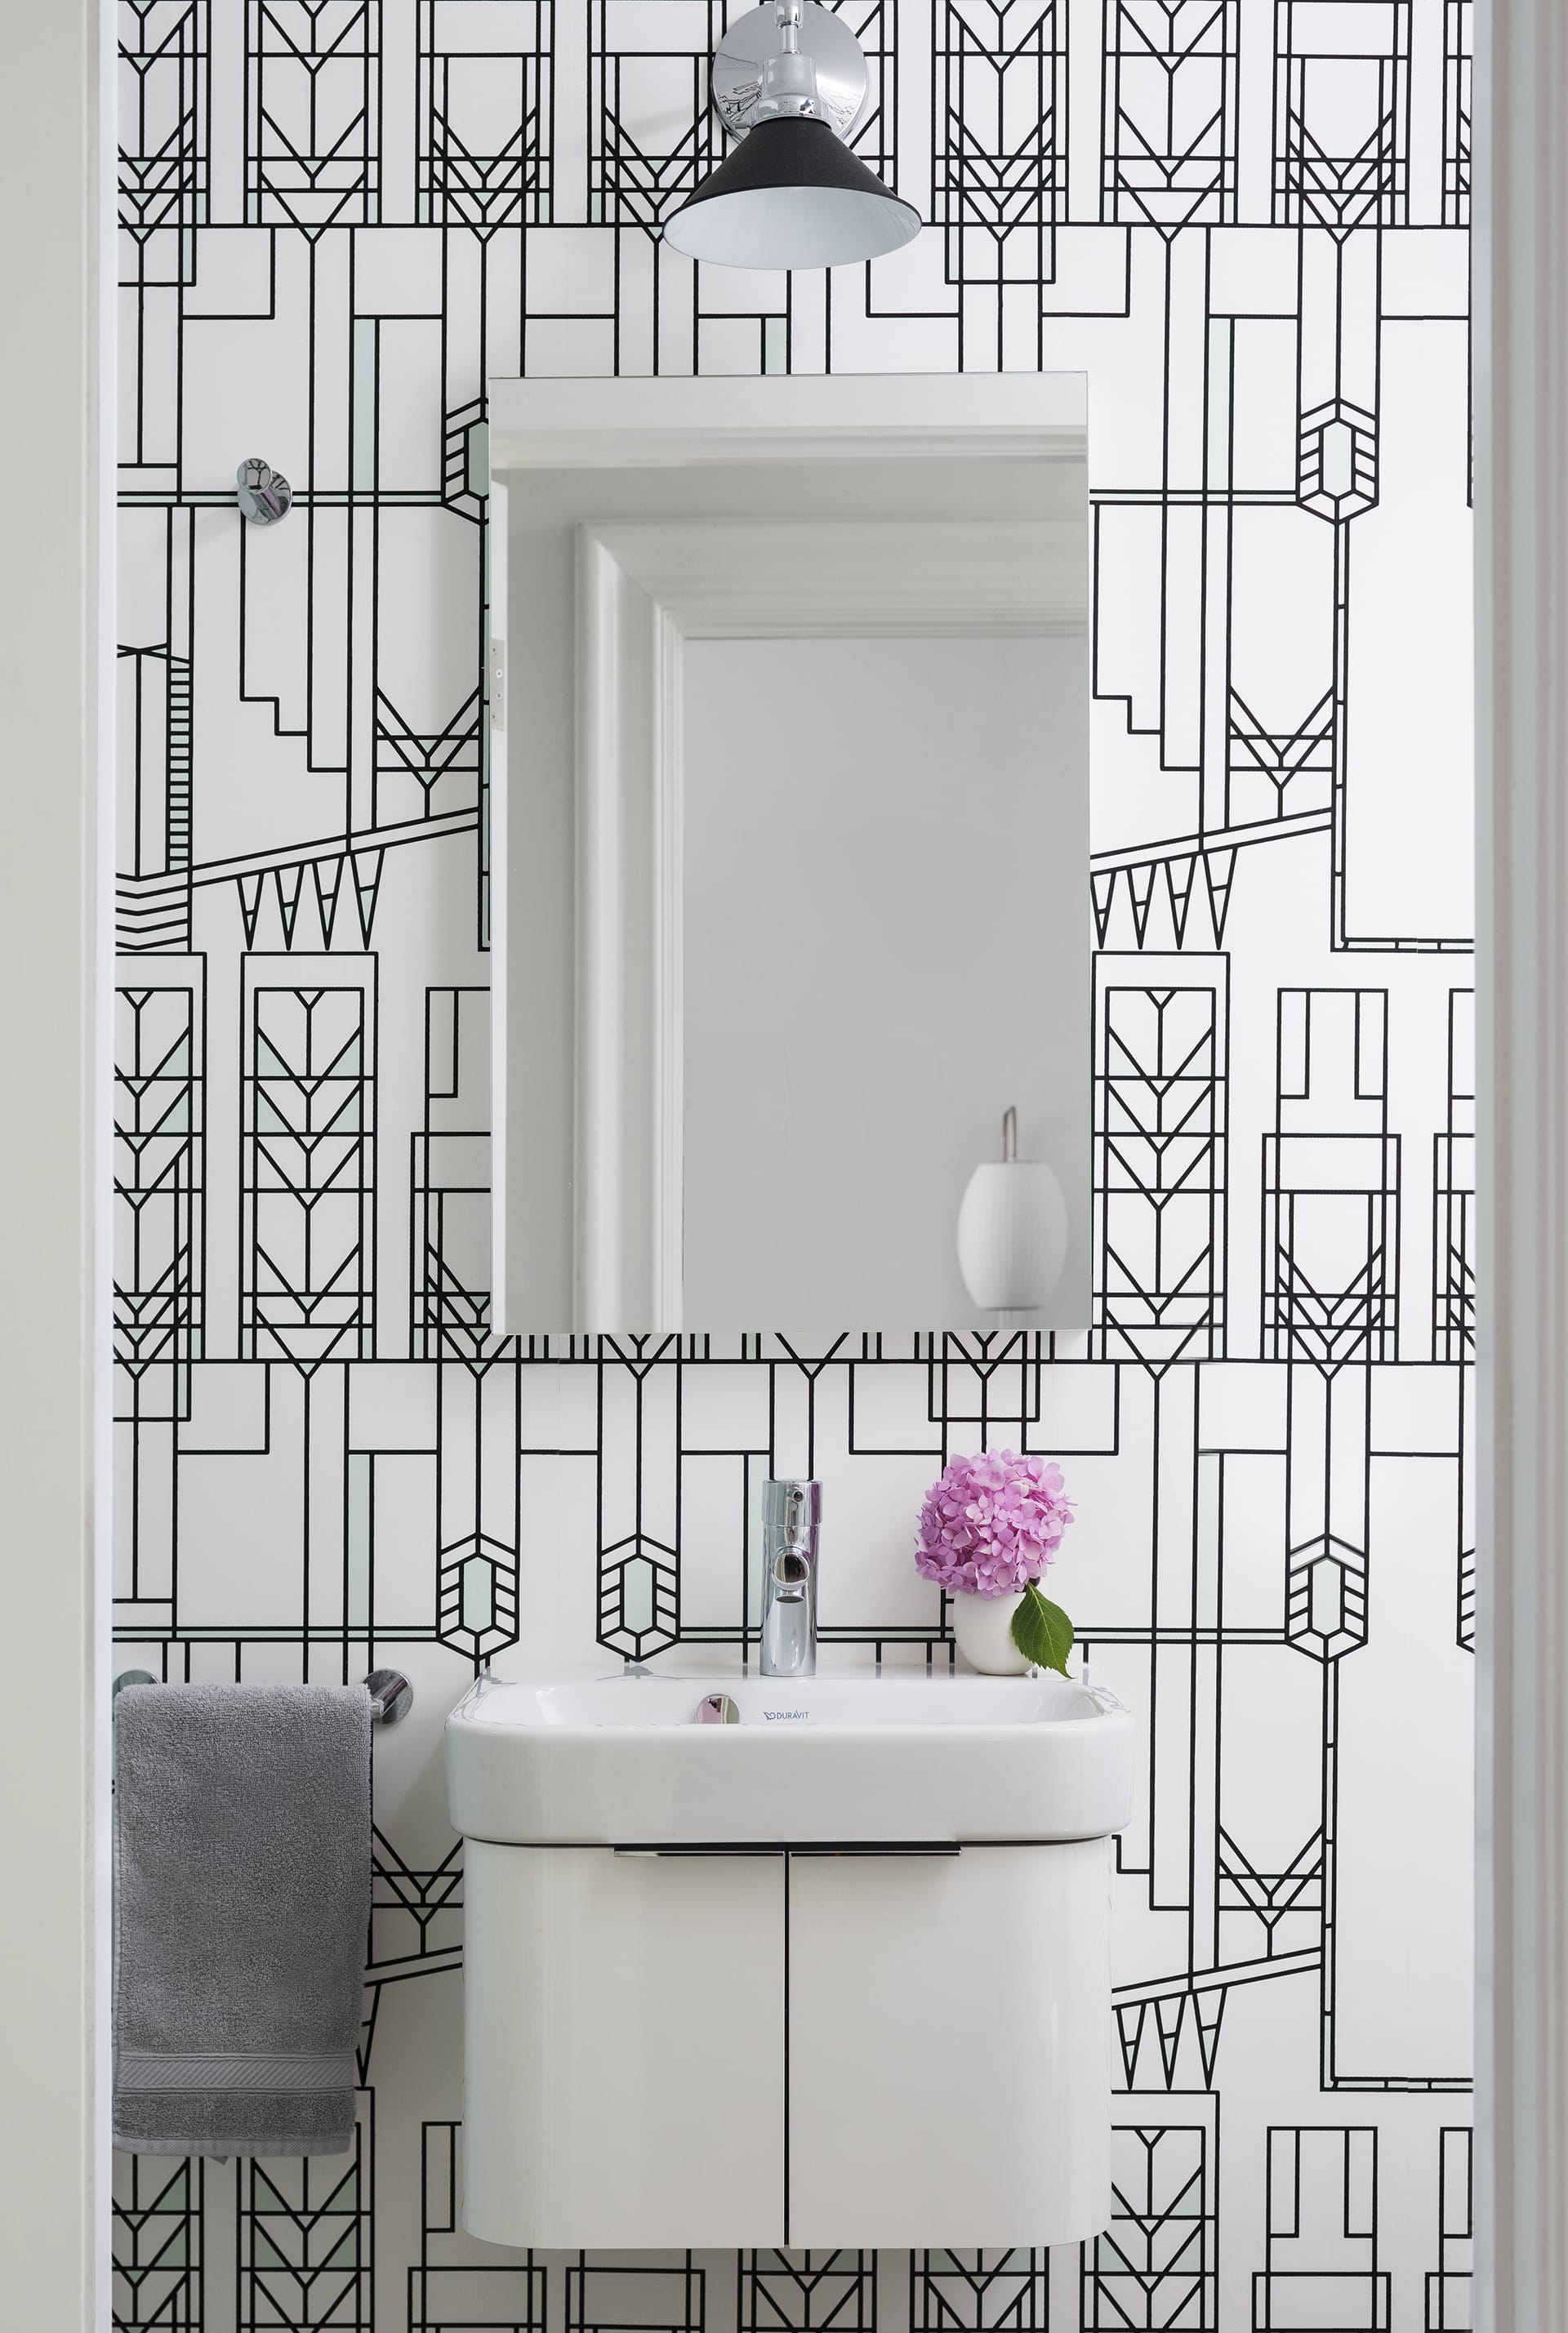 Guest bathroom with black and white wallpaper, white floating vanity, and pink flowers.